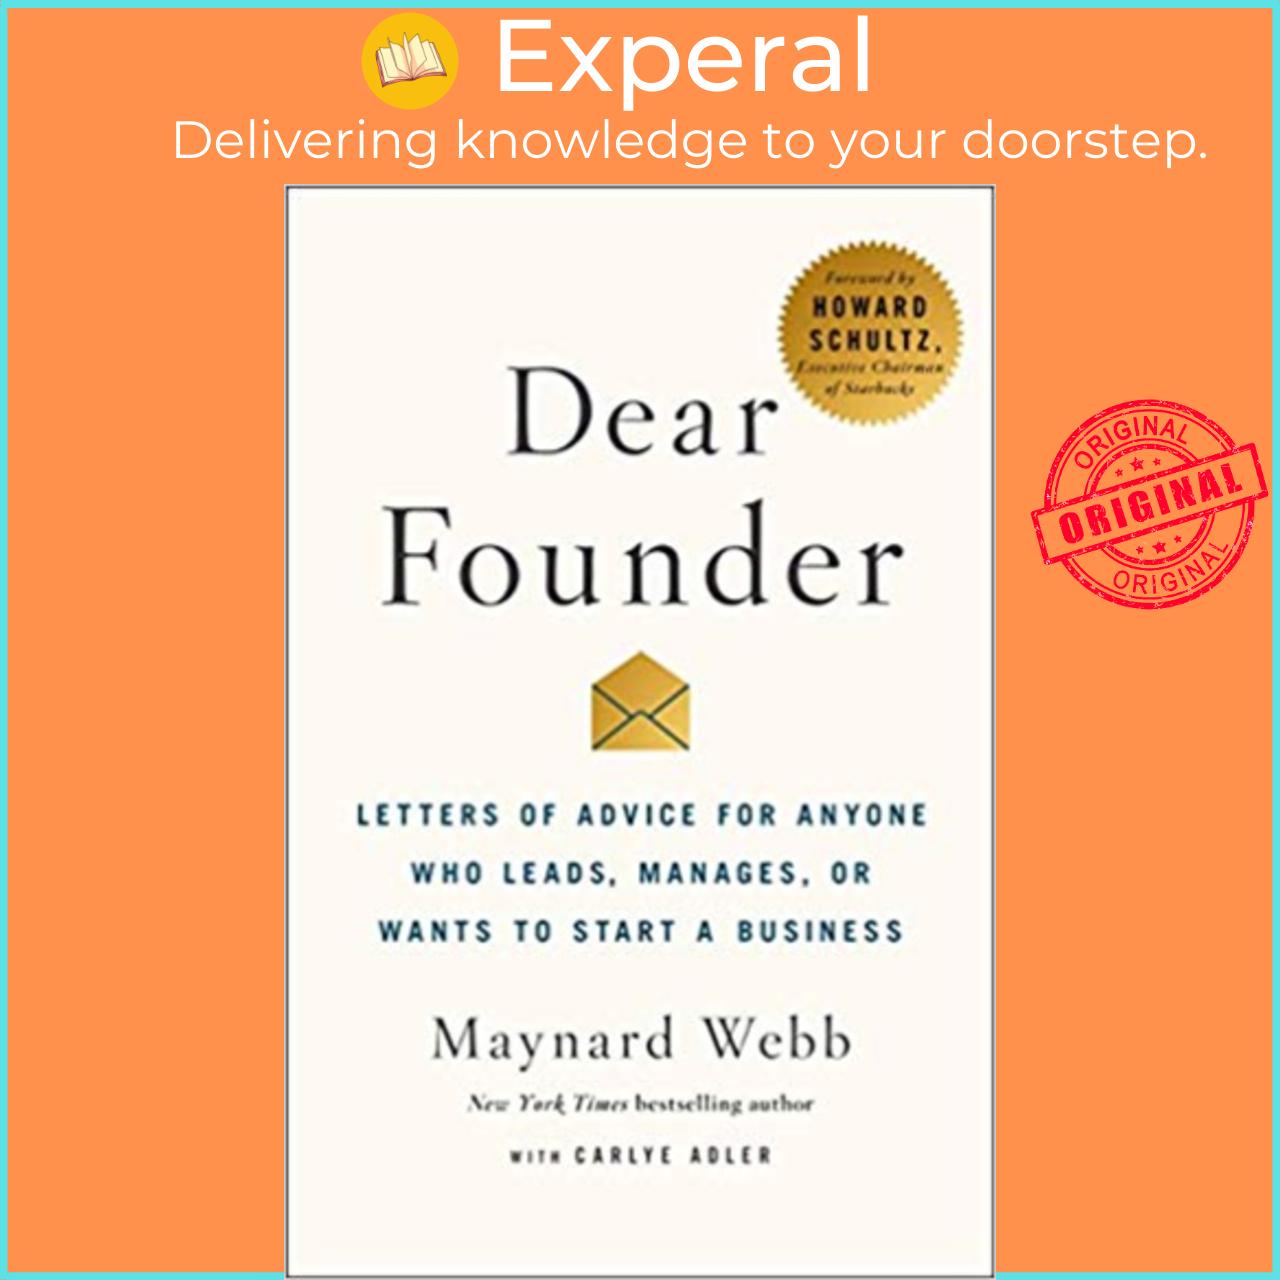 Sách - Dear Founder : Letters of Advice for Anyone Who Leads, Manages, or Wants by Maynard Webb (US edition, paperback)